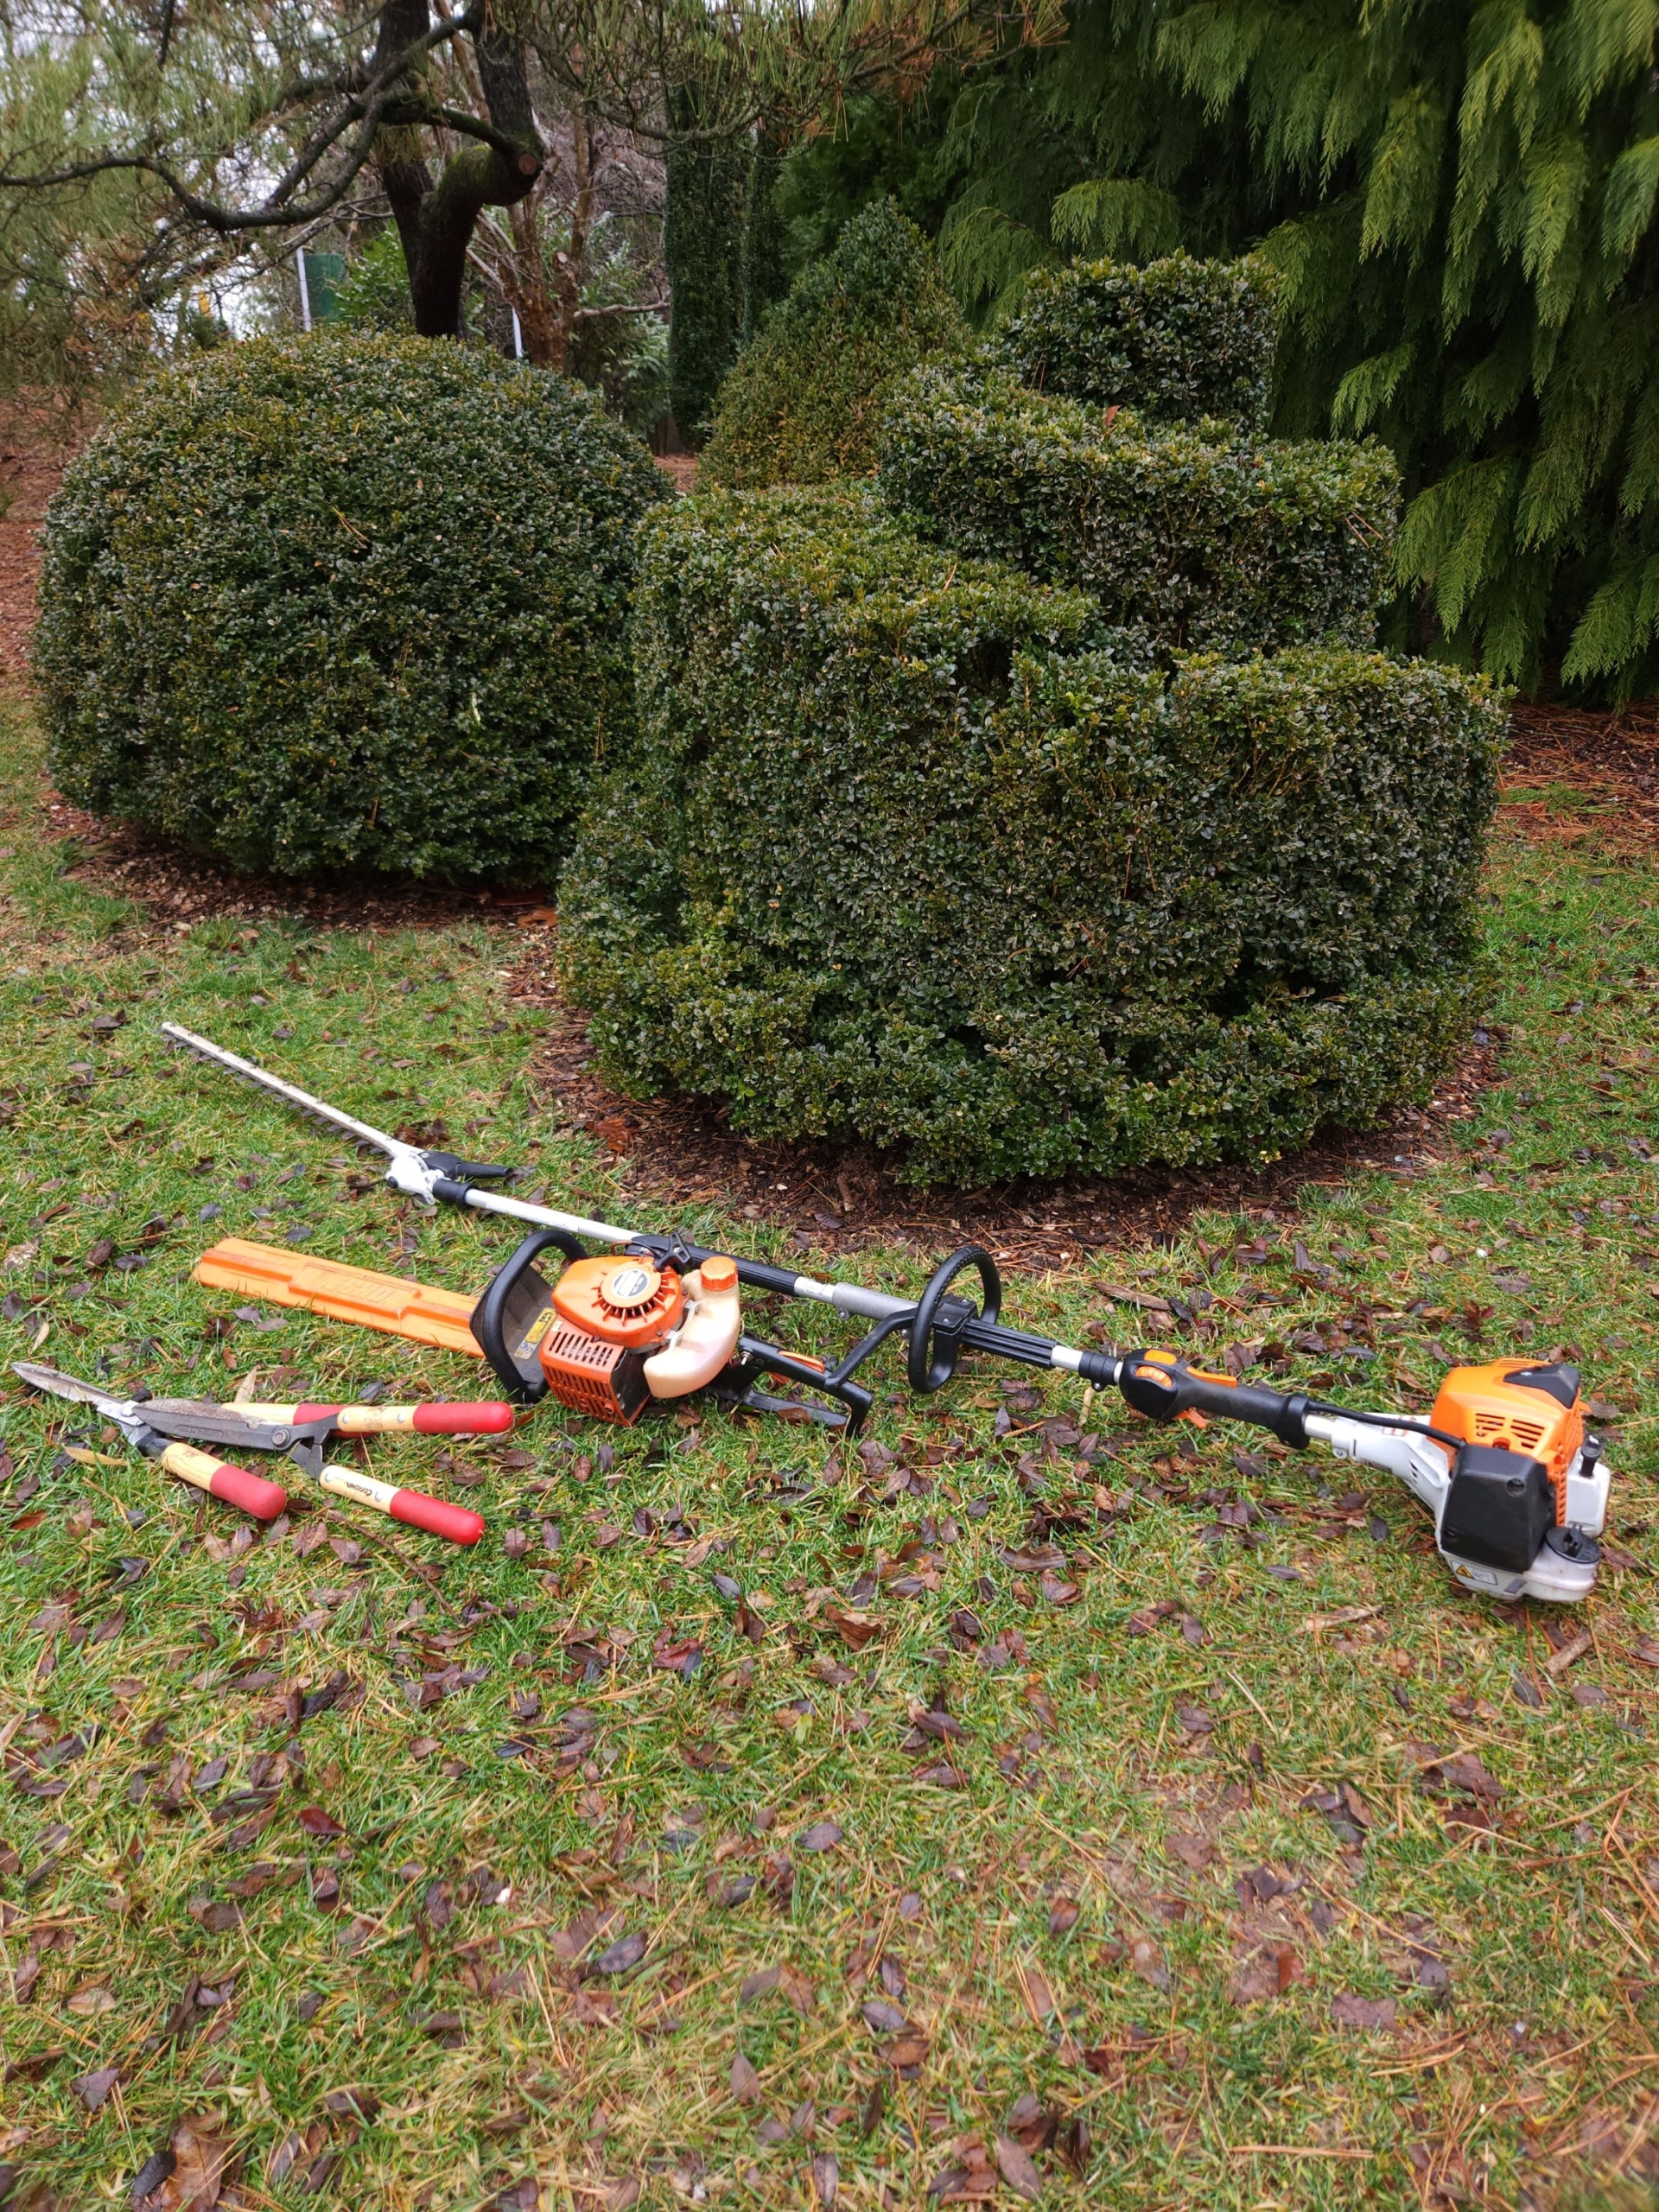 Several gardening tools are on the grass in front of two pruned hedges